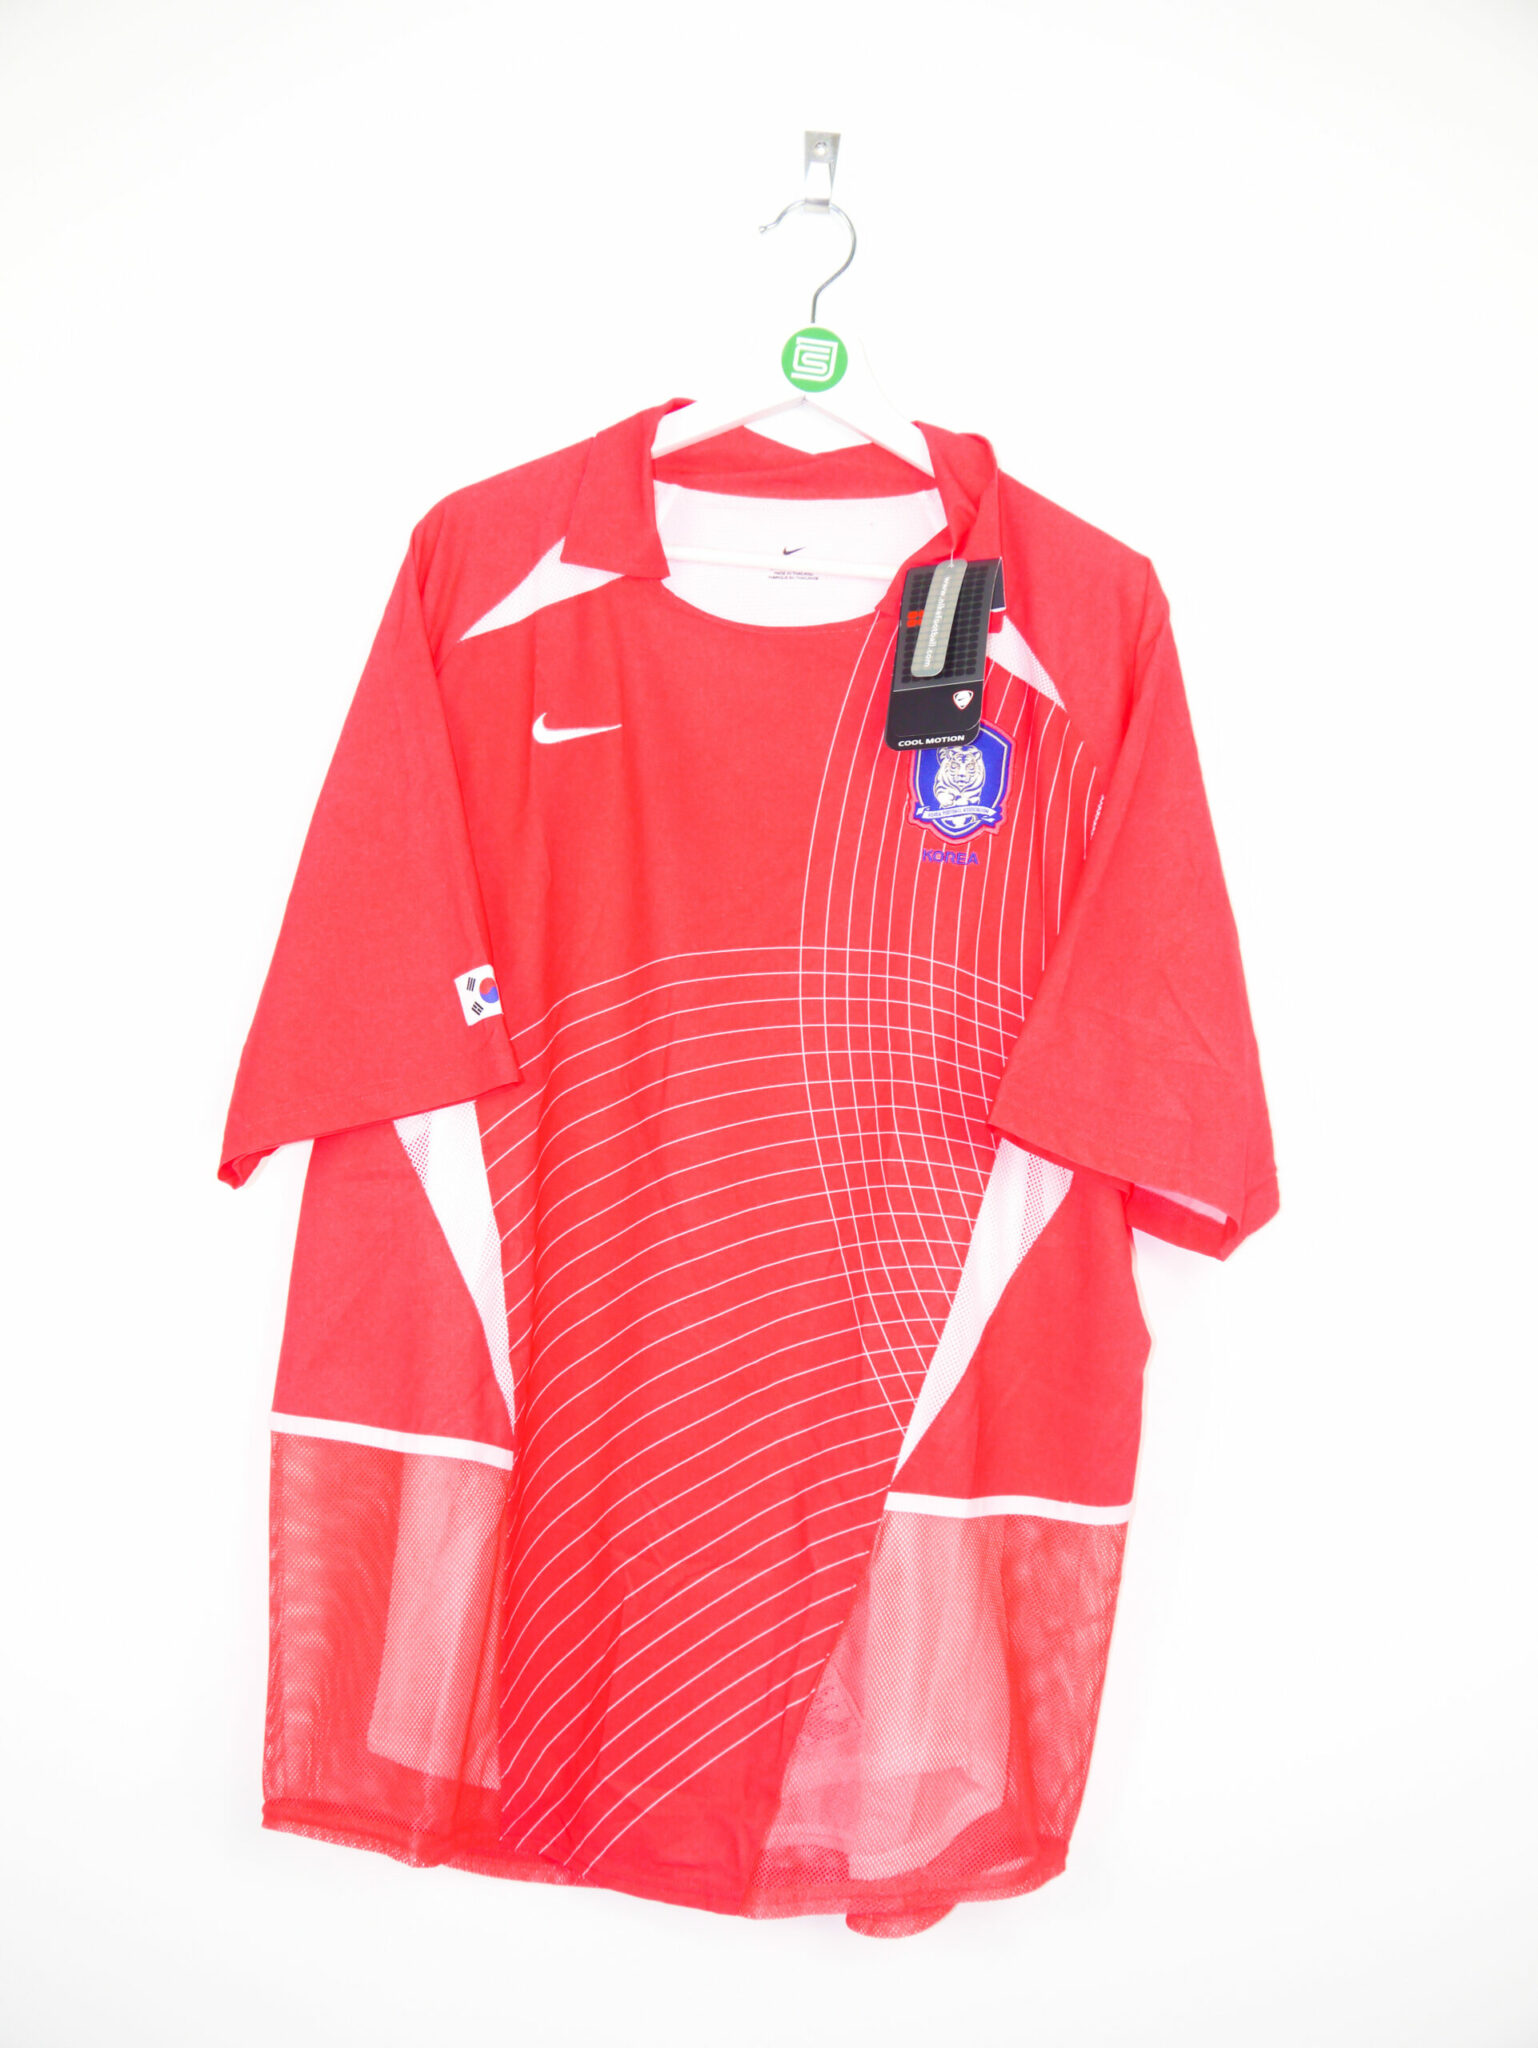 2002-03 South Korea *PLAYER ISSUE* home jersey w/ tags - XL • RB